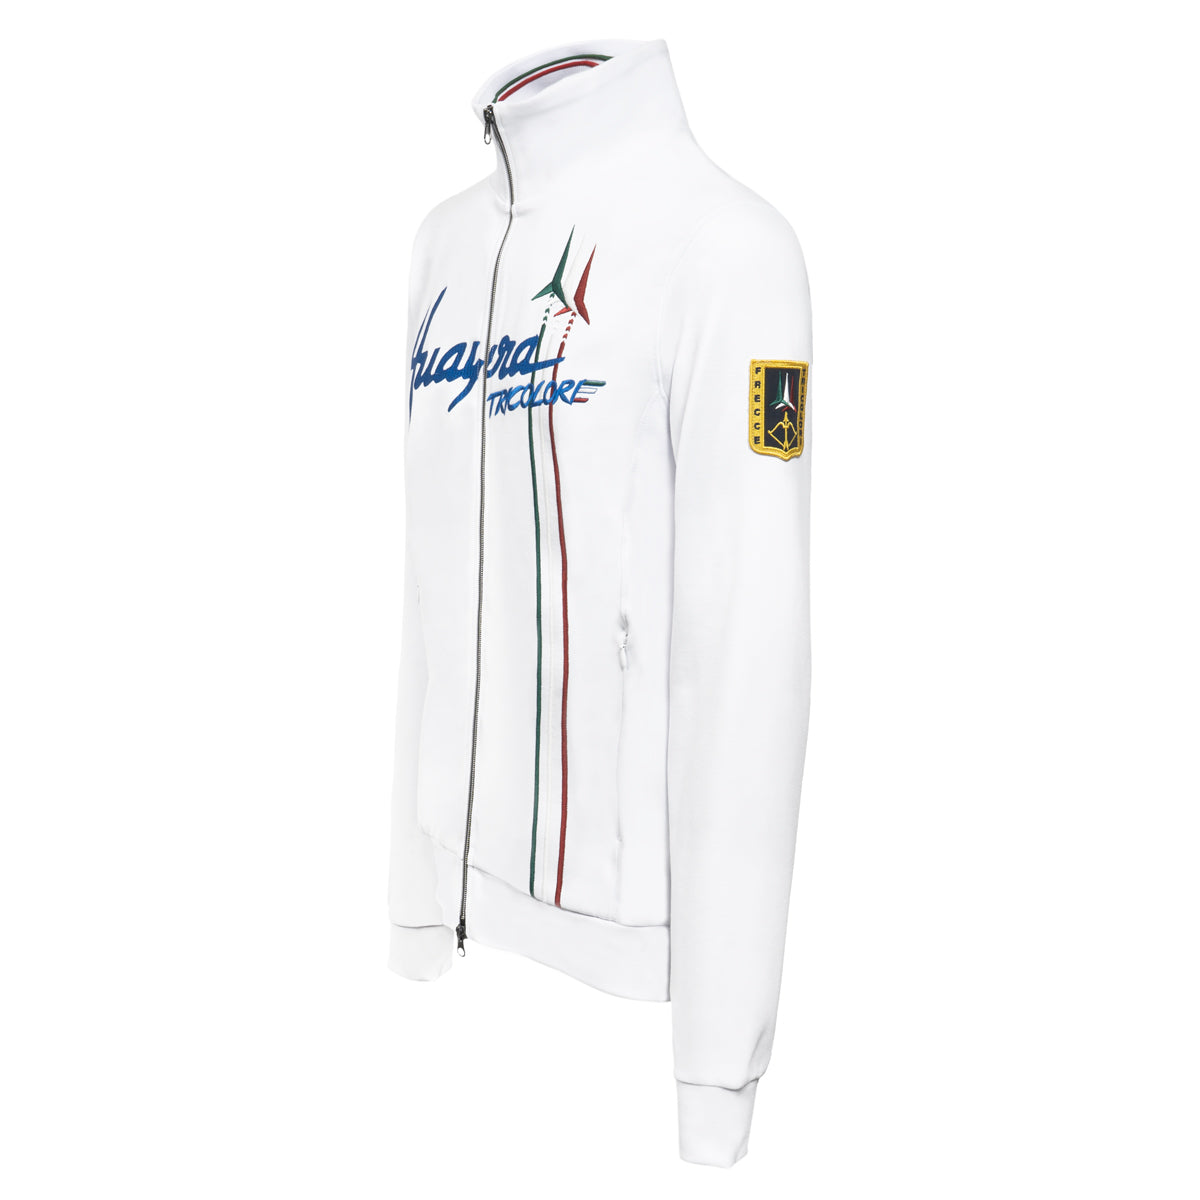 Pull homme blanc | Huayra Tricolore Capsule